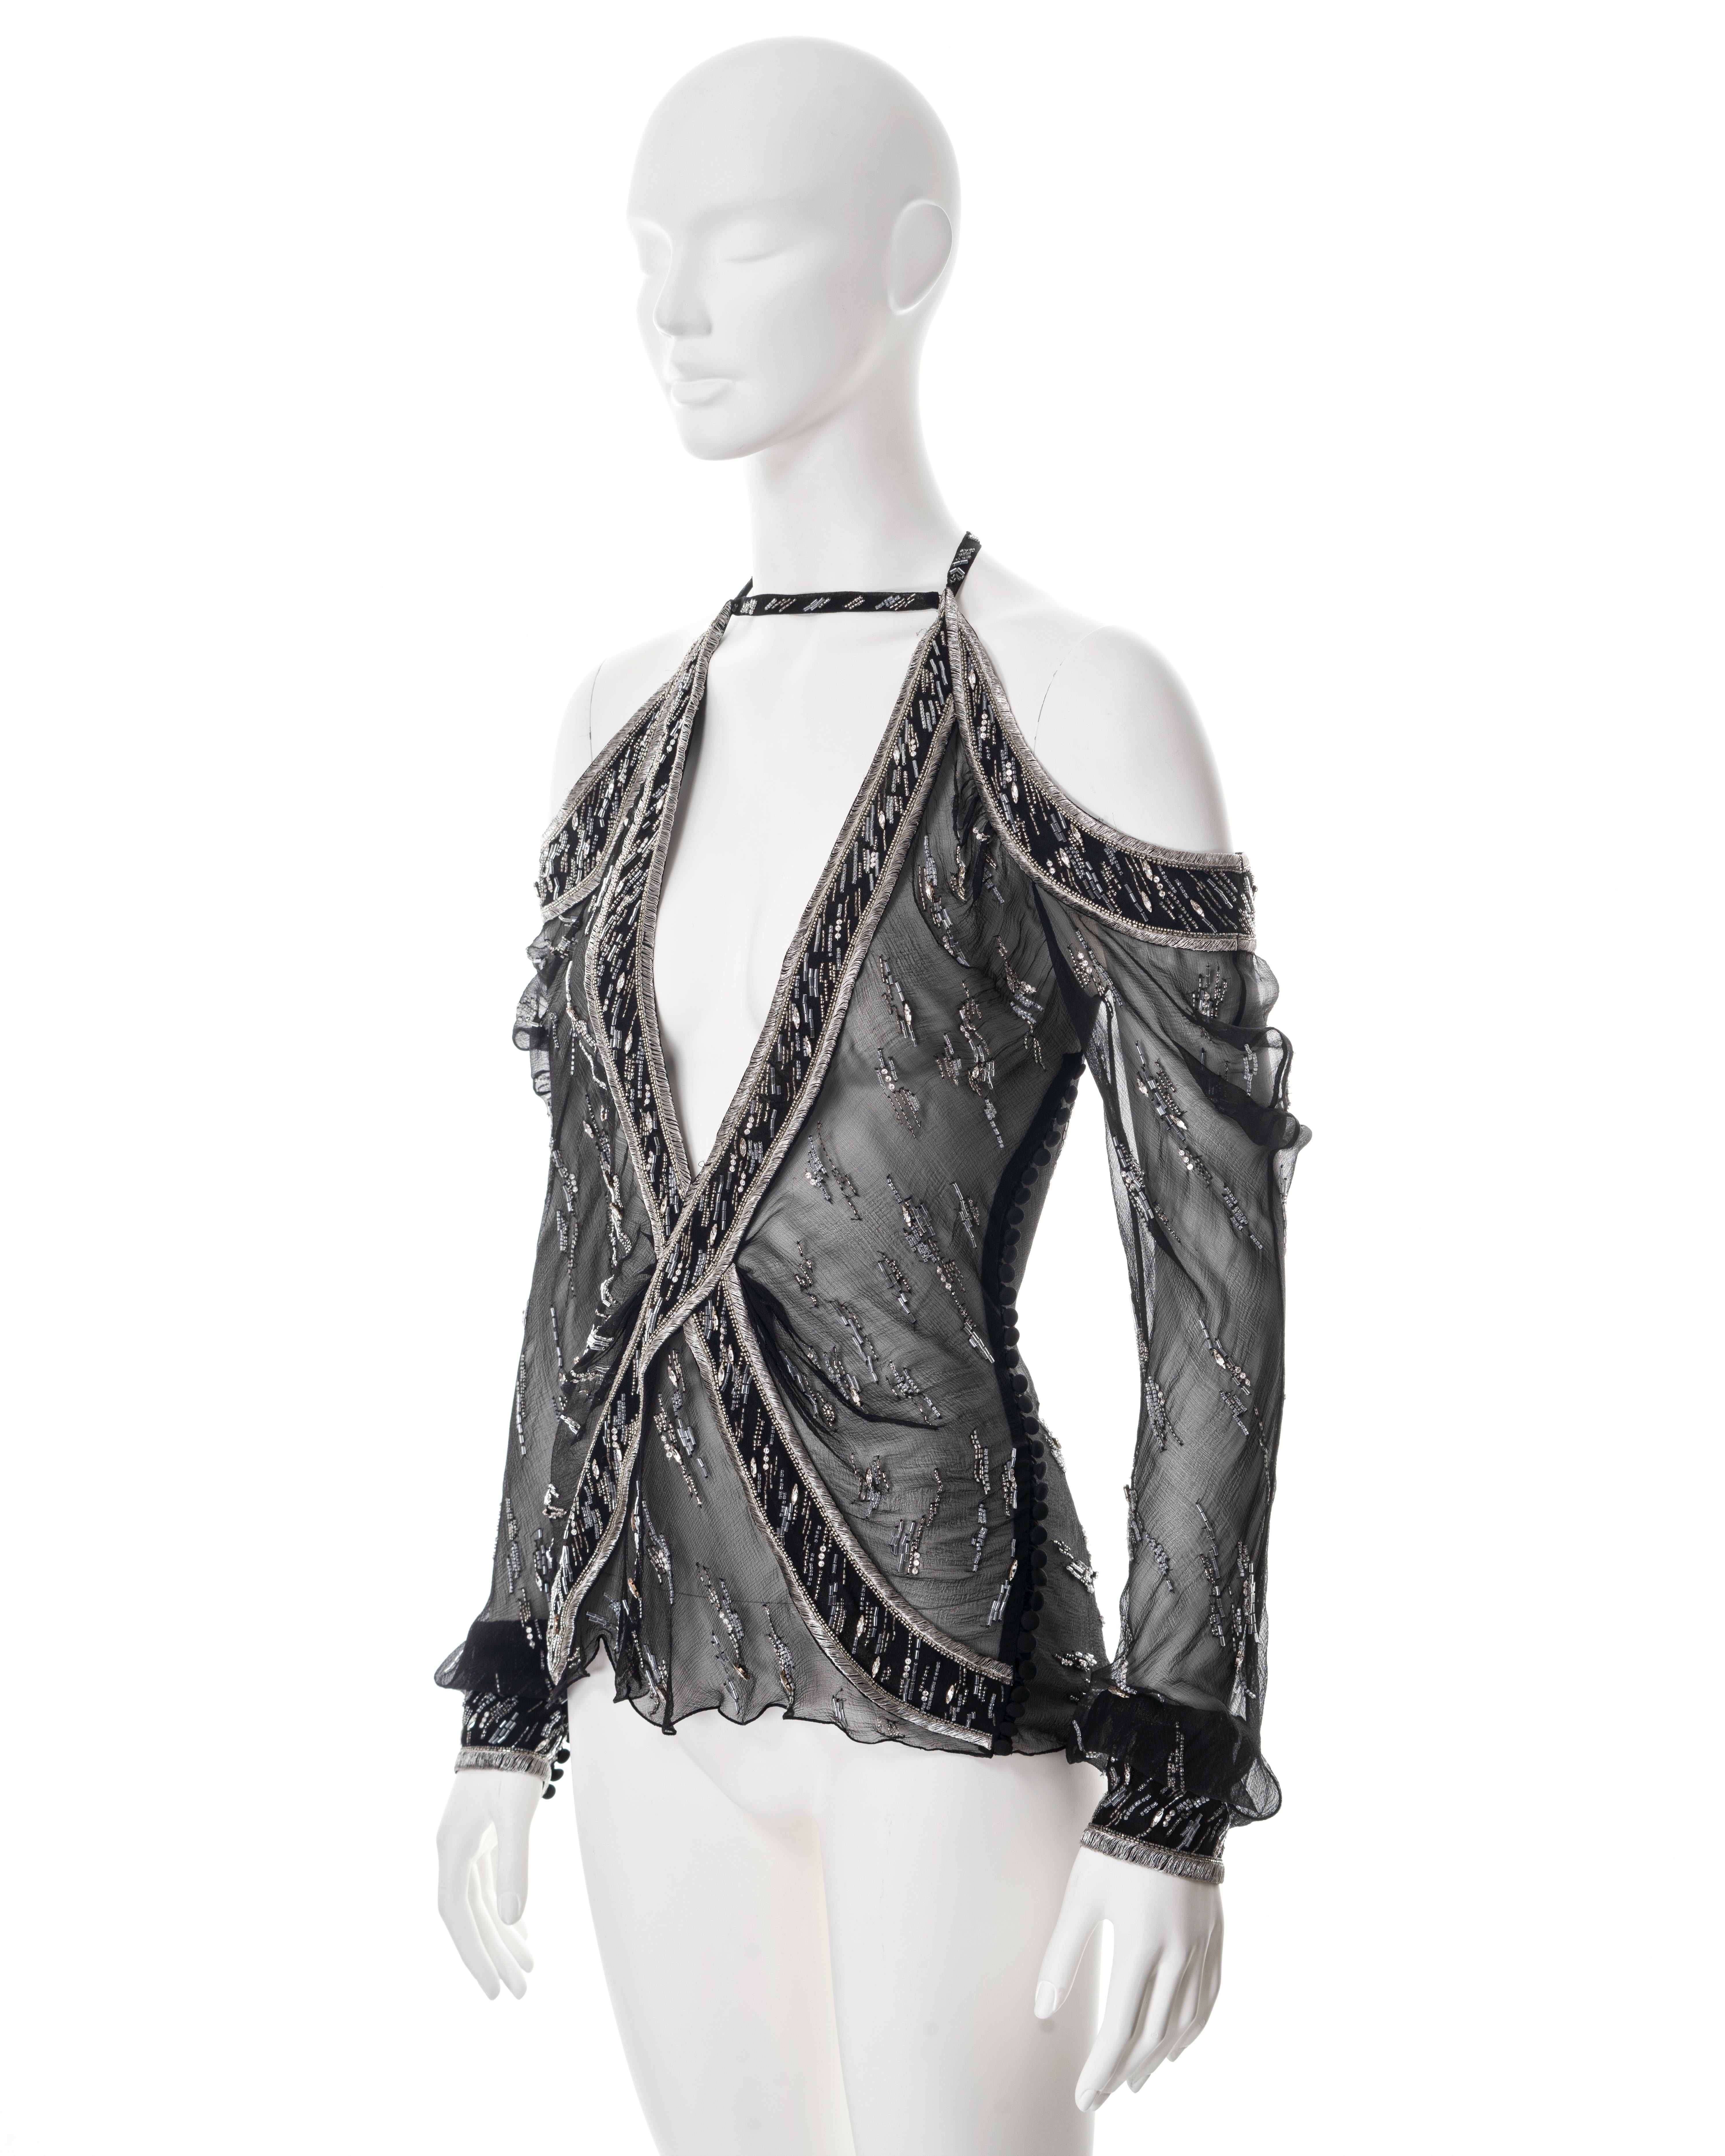 Christian Dior by John Galliano embellished silk evening blouse, ss 2005 3